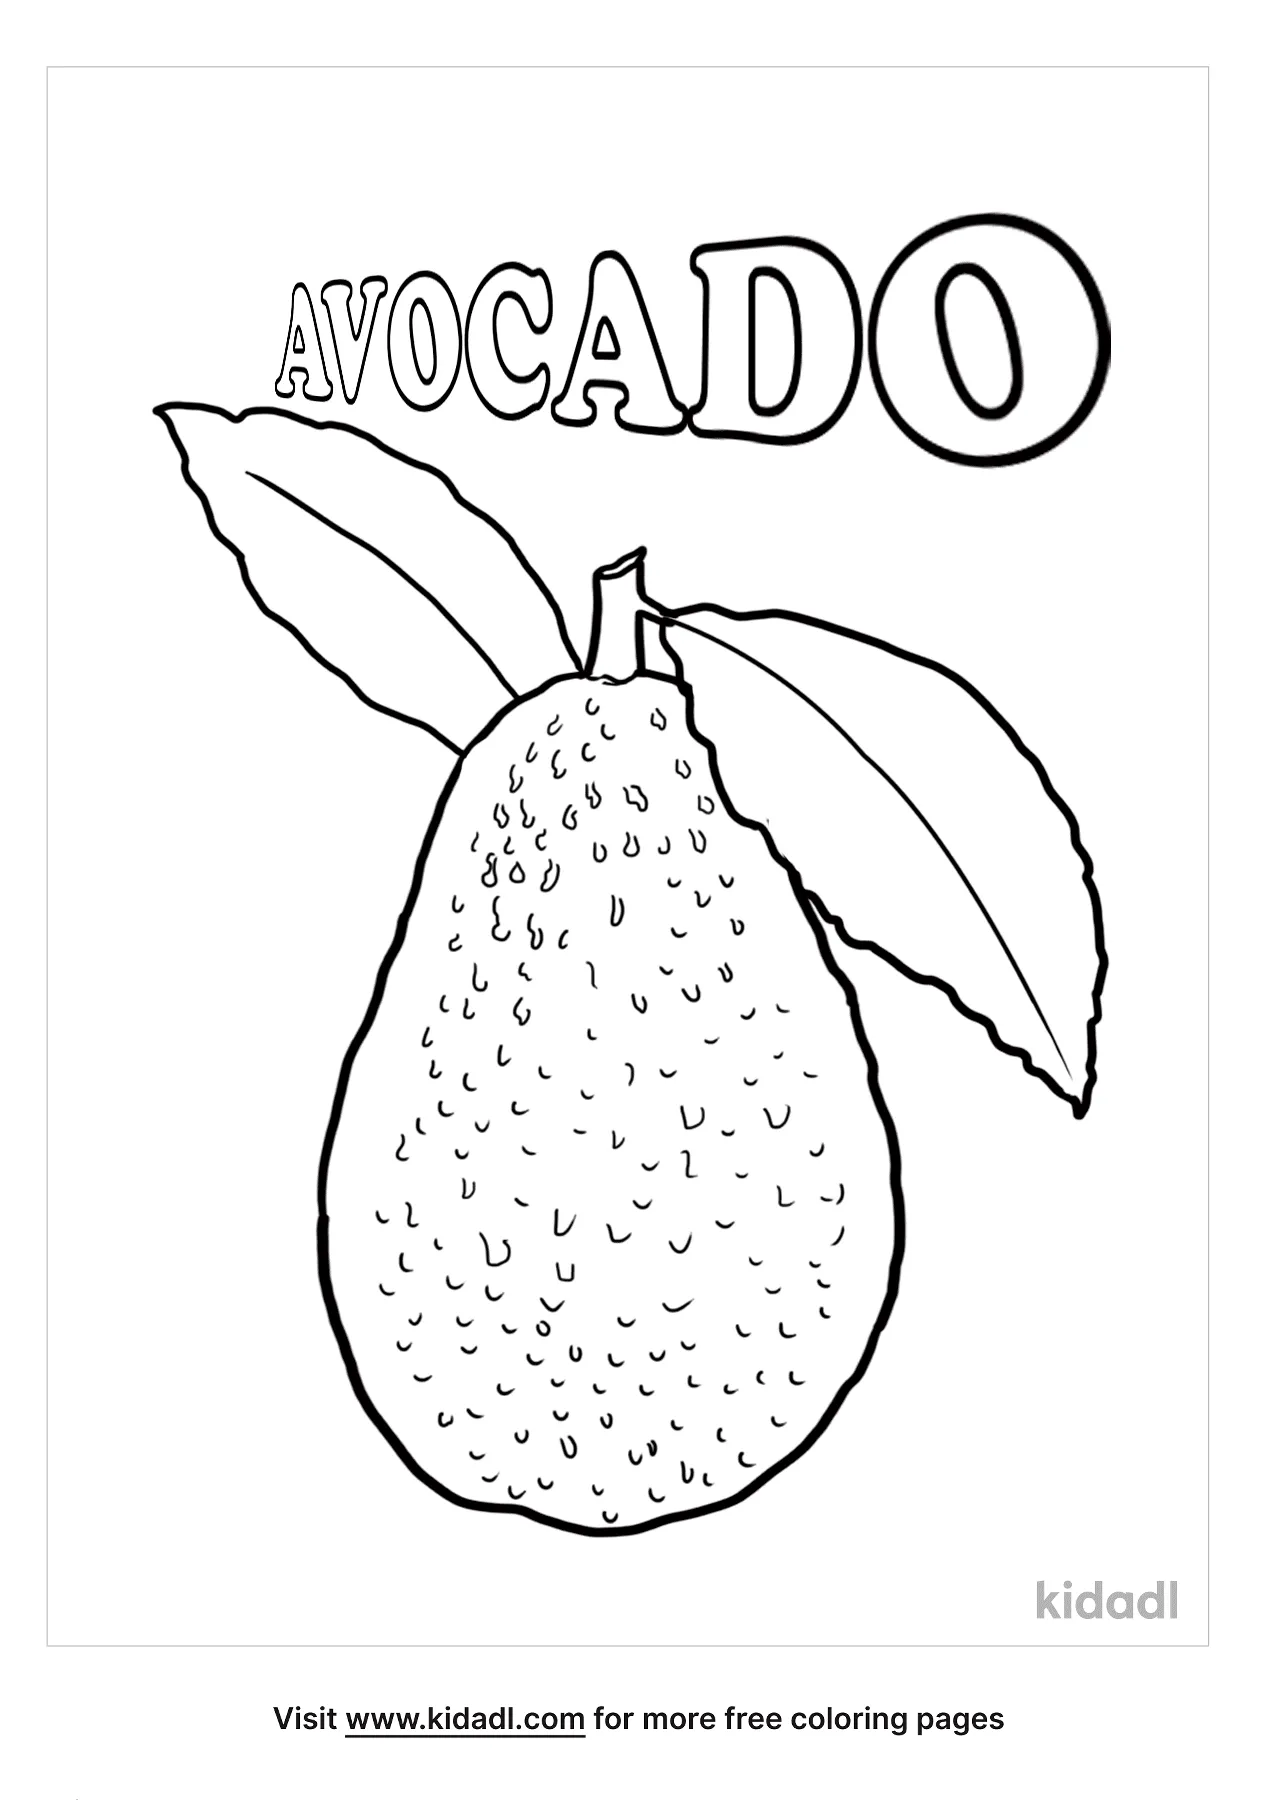 Avocado Coloring Pages   Free Fruit Coloring Pages   Kidadl